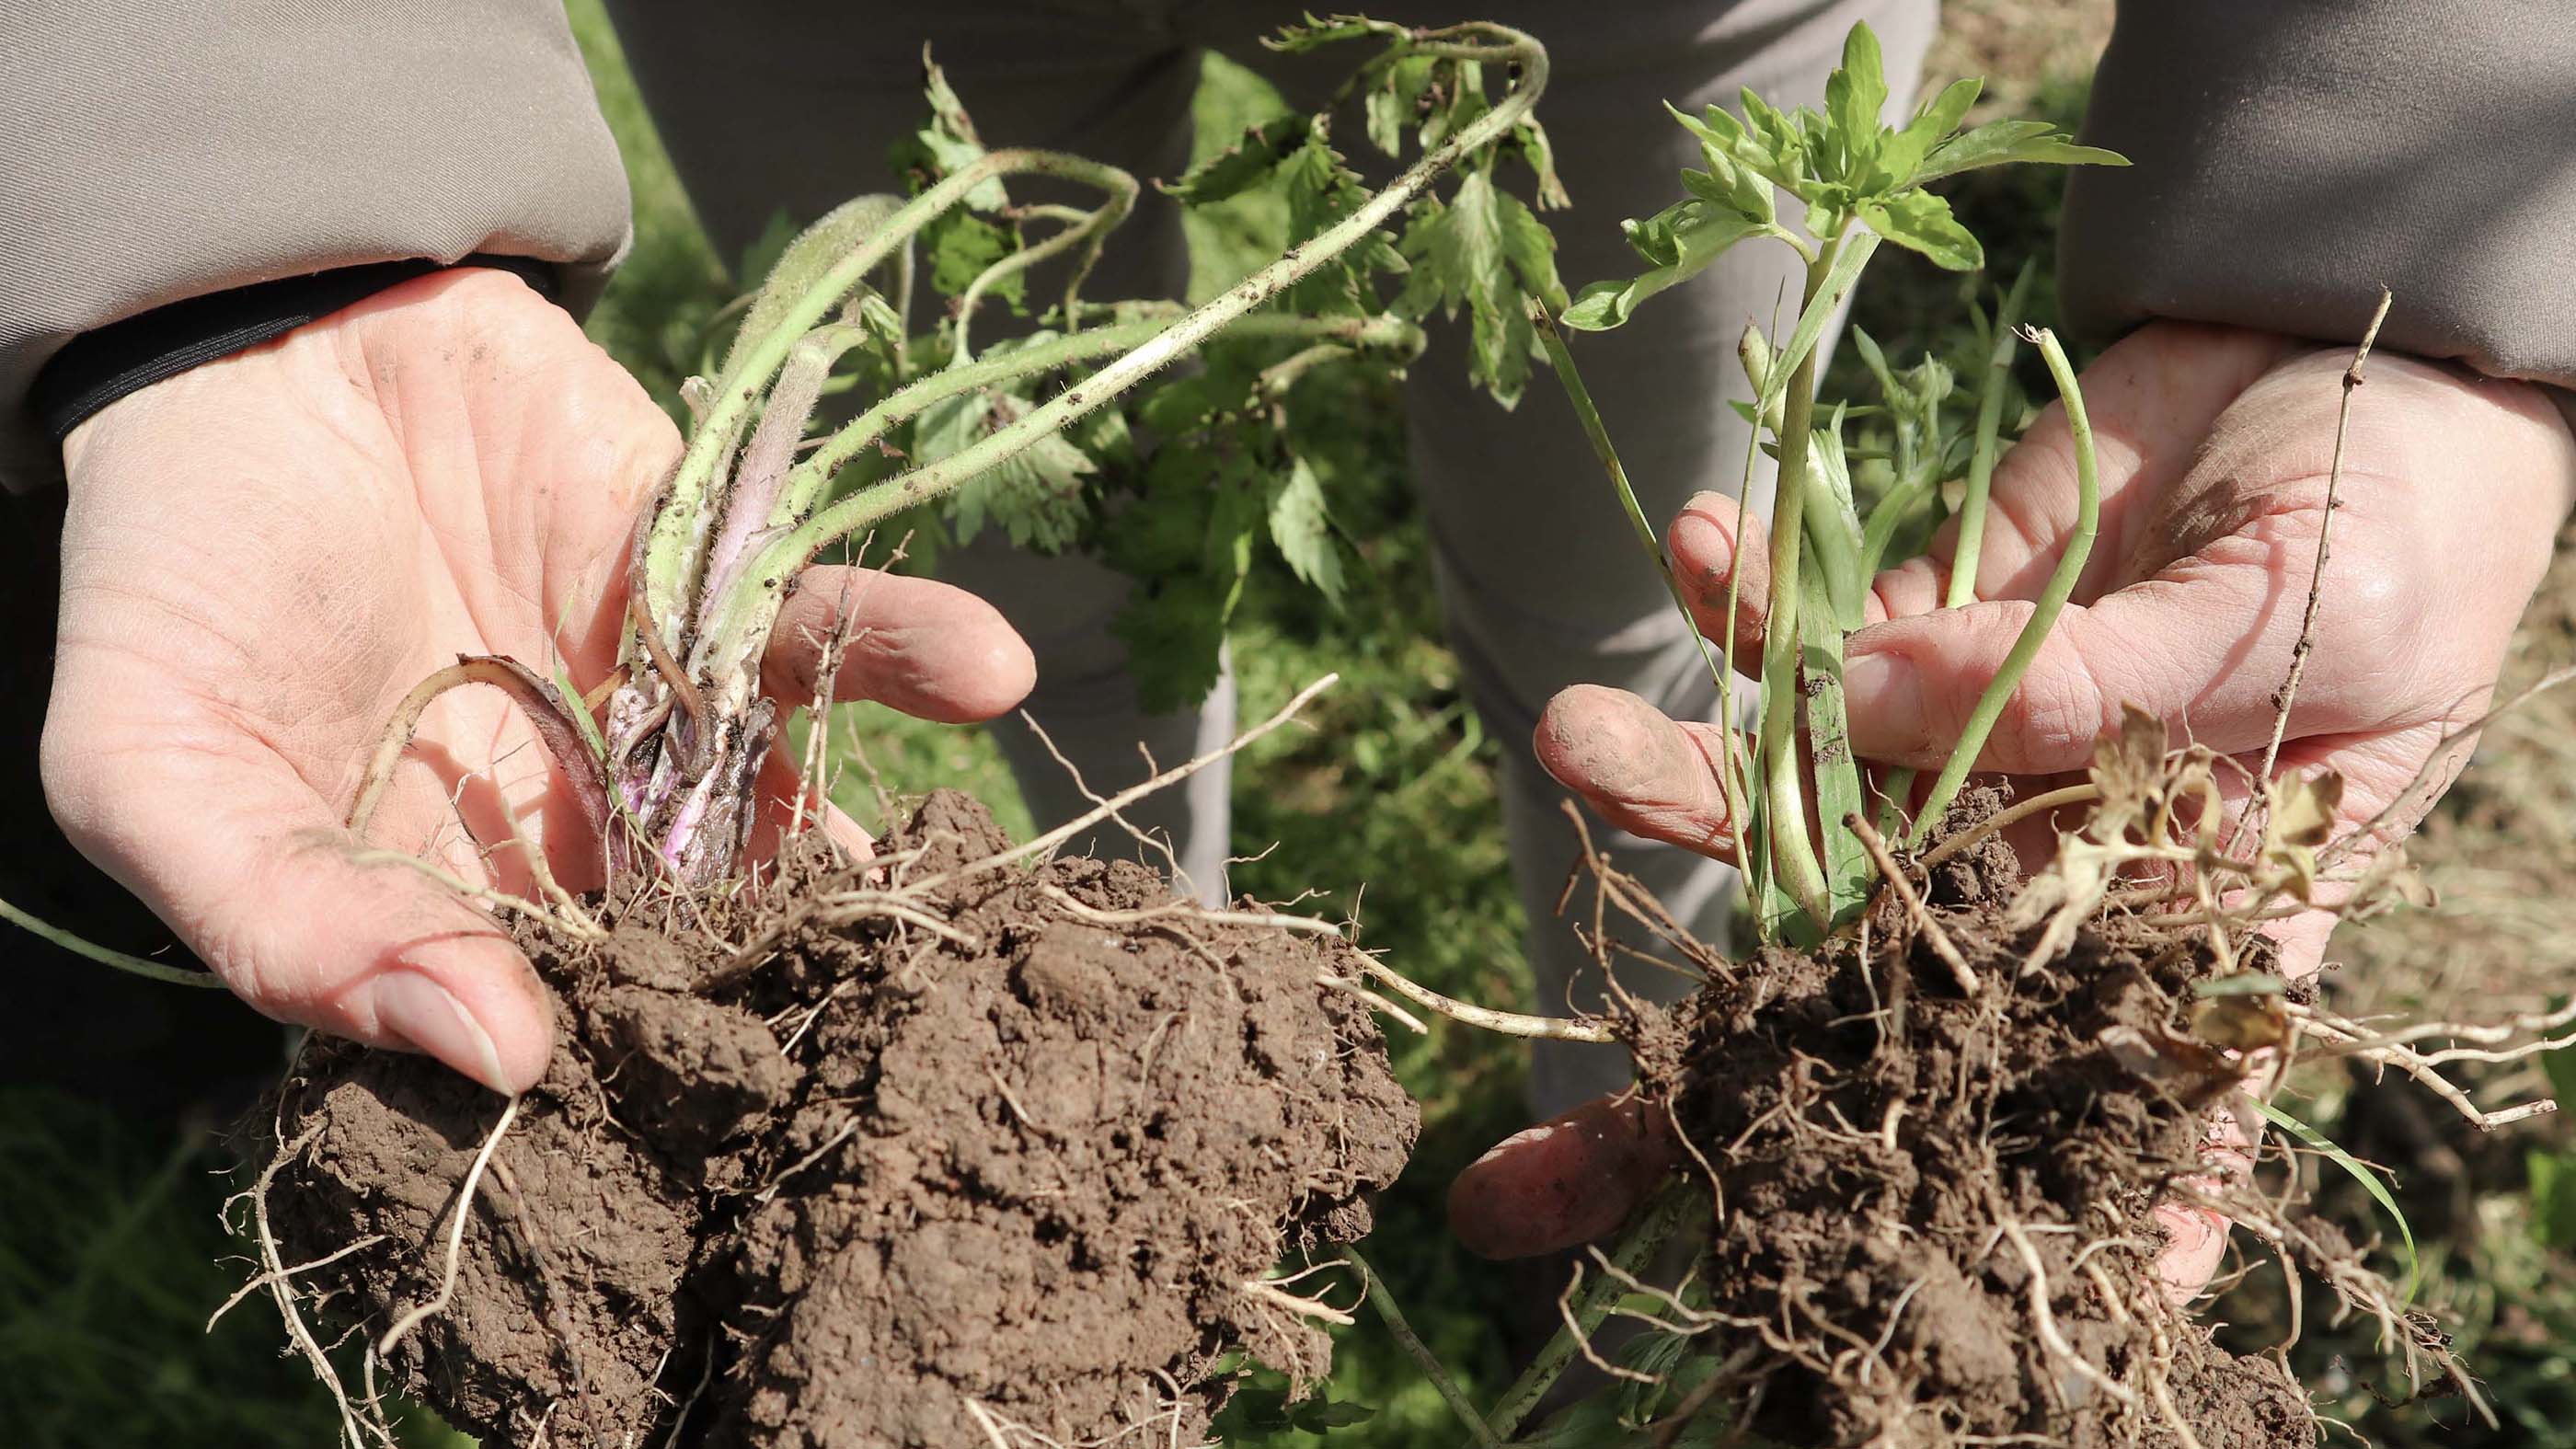 Two saplings held by hands, the bigger one has more soil on its root compared to the smaller one | mey®